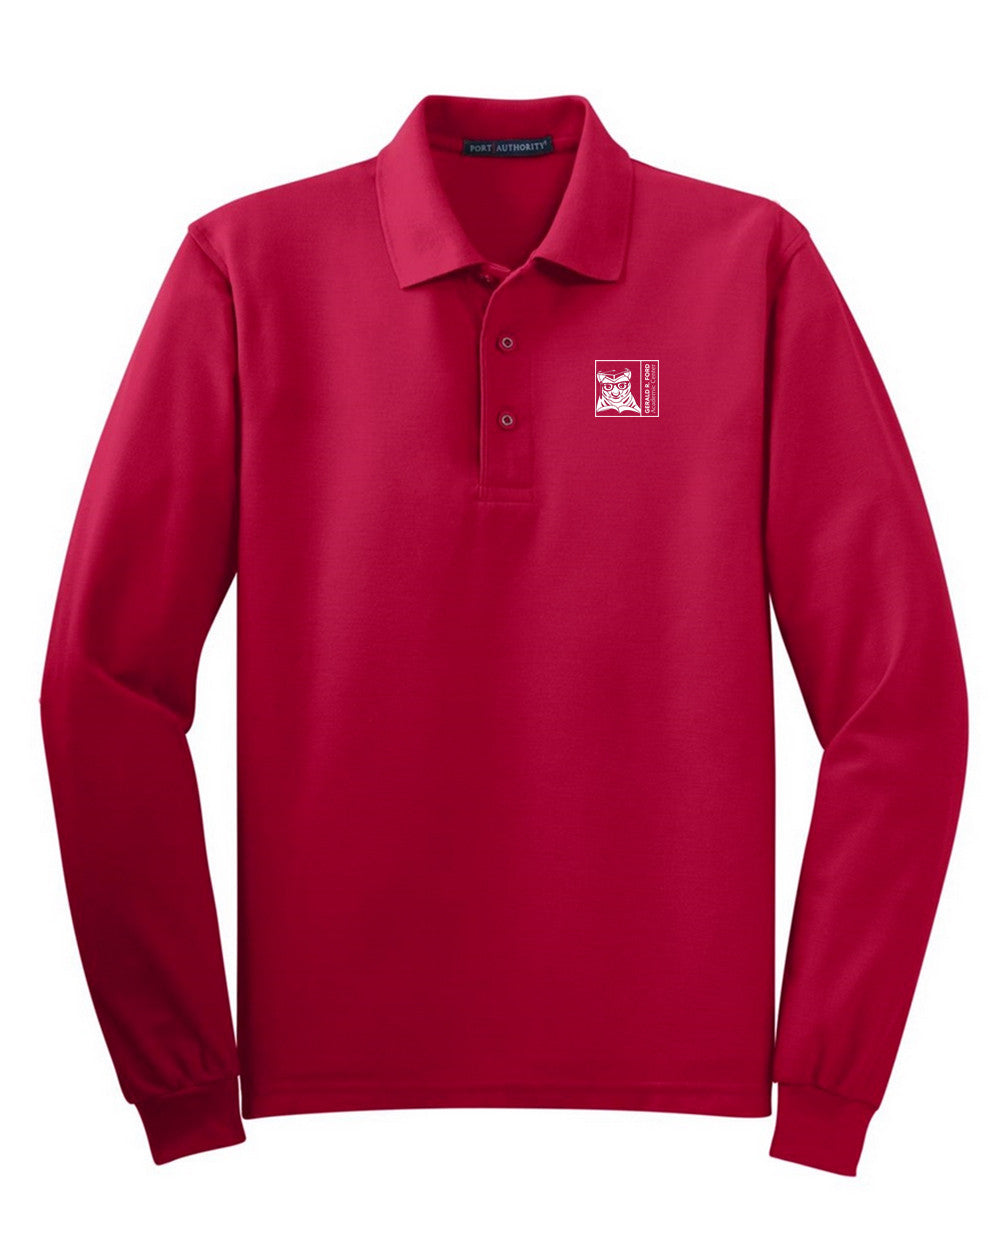 Martin Luther King Jr. Long Sleeve Polo